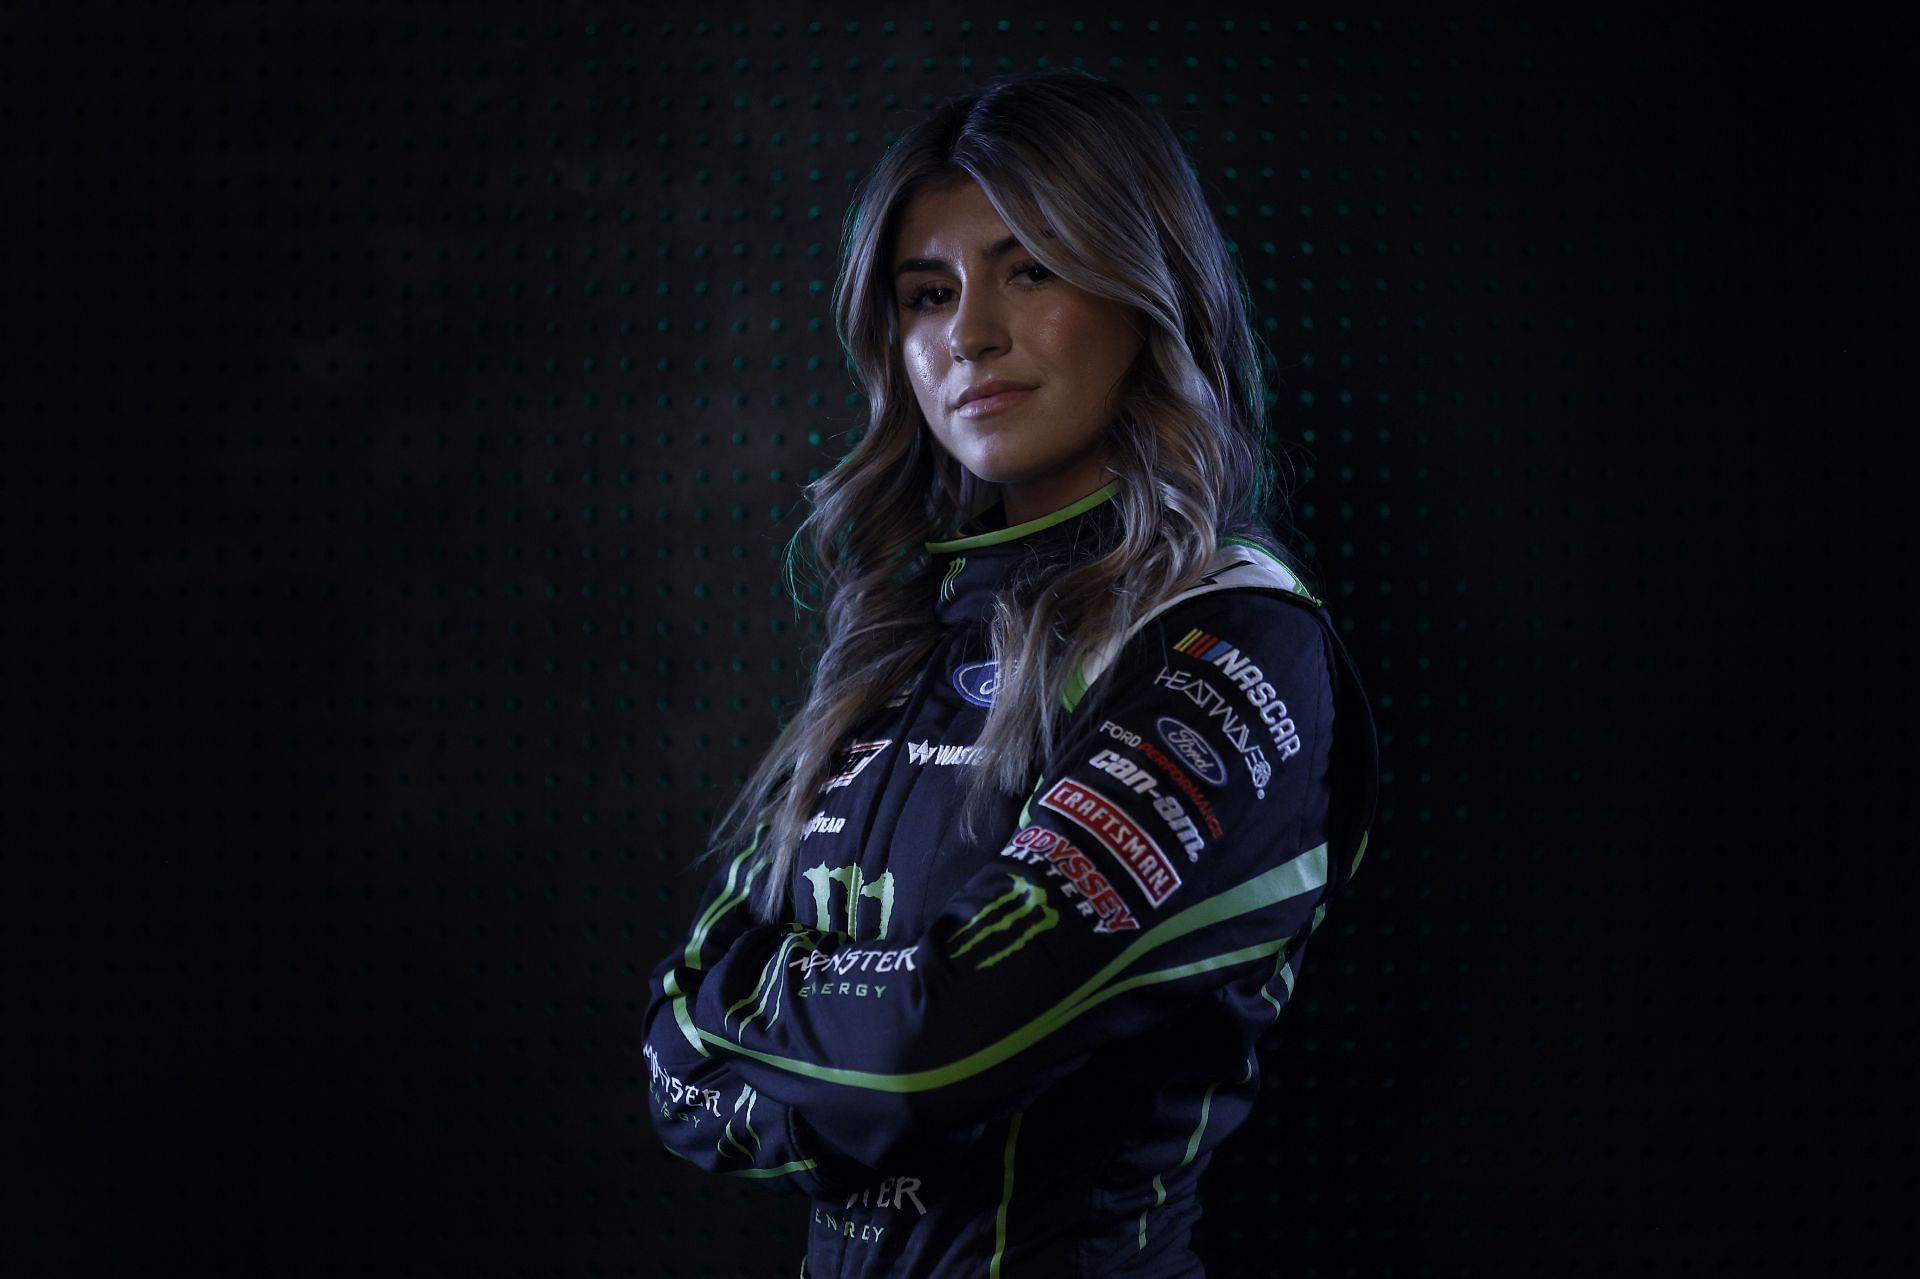 Hailie Deegan during NASCAR Production Days (Photo by Jared C. Tilton/Getty Images)